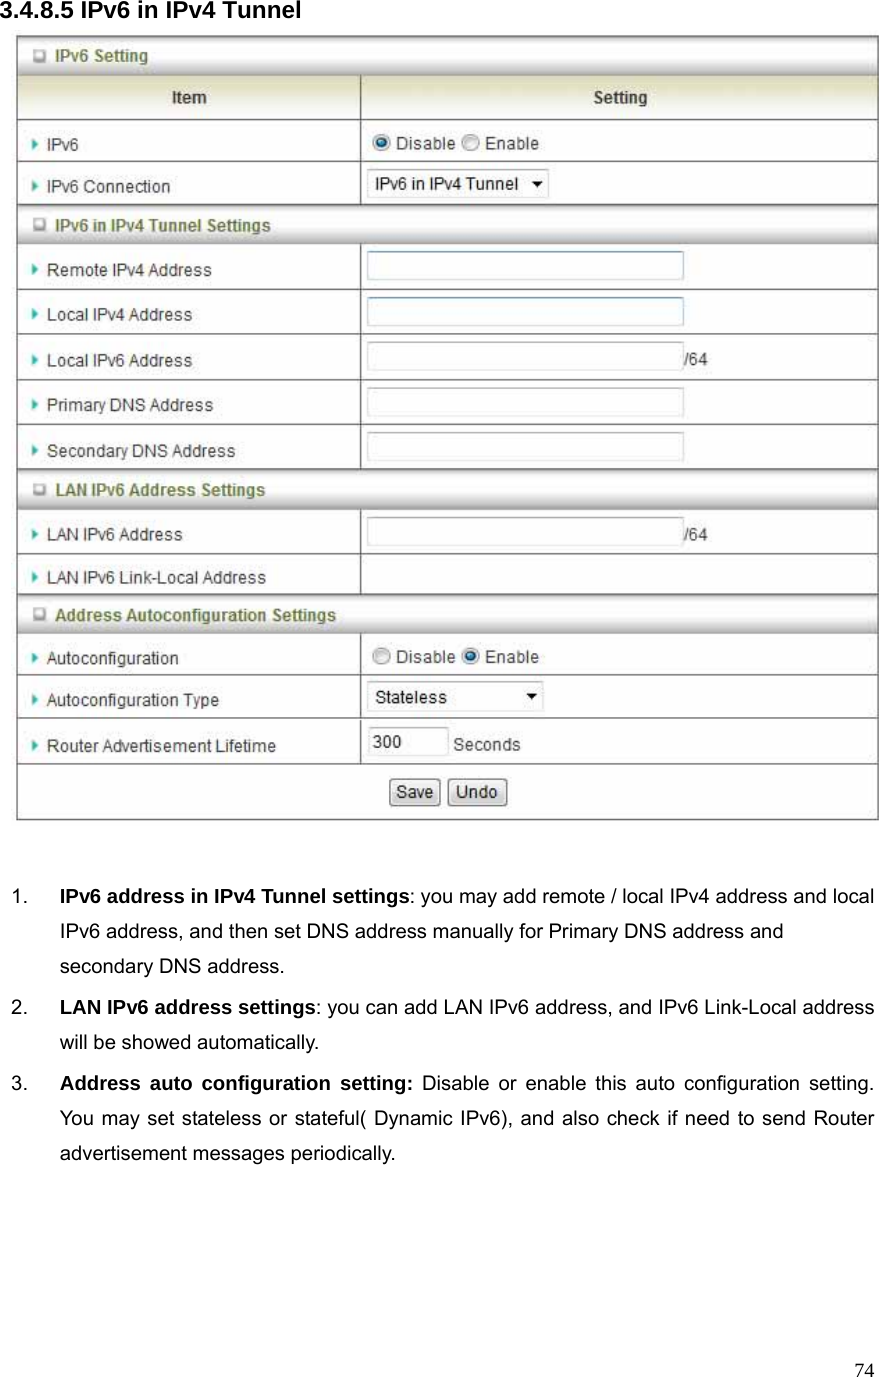  743.4.8.5 IPv6 in IPv4 Tunnel   1.  IPv6 address in IPv4 Tunnel settings: you may add remote / local IPv4 address and local IPv6 address, and then set DNS address manually for Primary DNS address and secondary DNS address. 2.  LAN IPv6 address settings: you can add LAN IPv6 address, and IPv6 Link-Local address will be showed automatically. 3.  Address auto configuration setting: Disable or enable this auto configuration setting. You may set stateless or stateful( Dynamic IPv6), and also check if need to send Router advertisement messages periodically.    